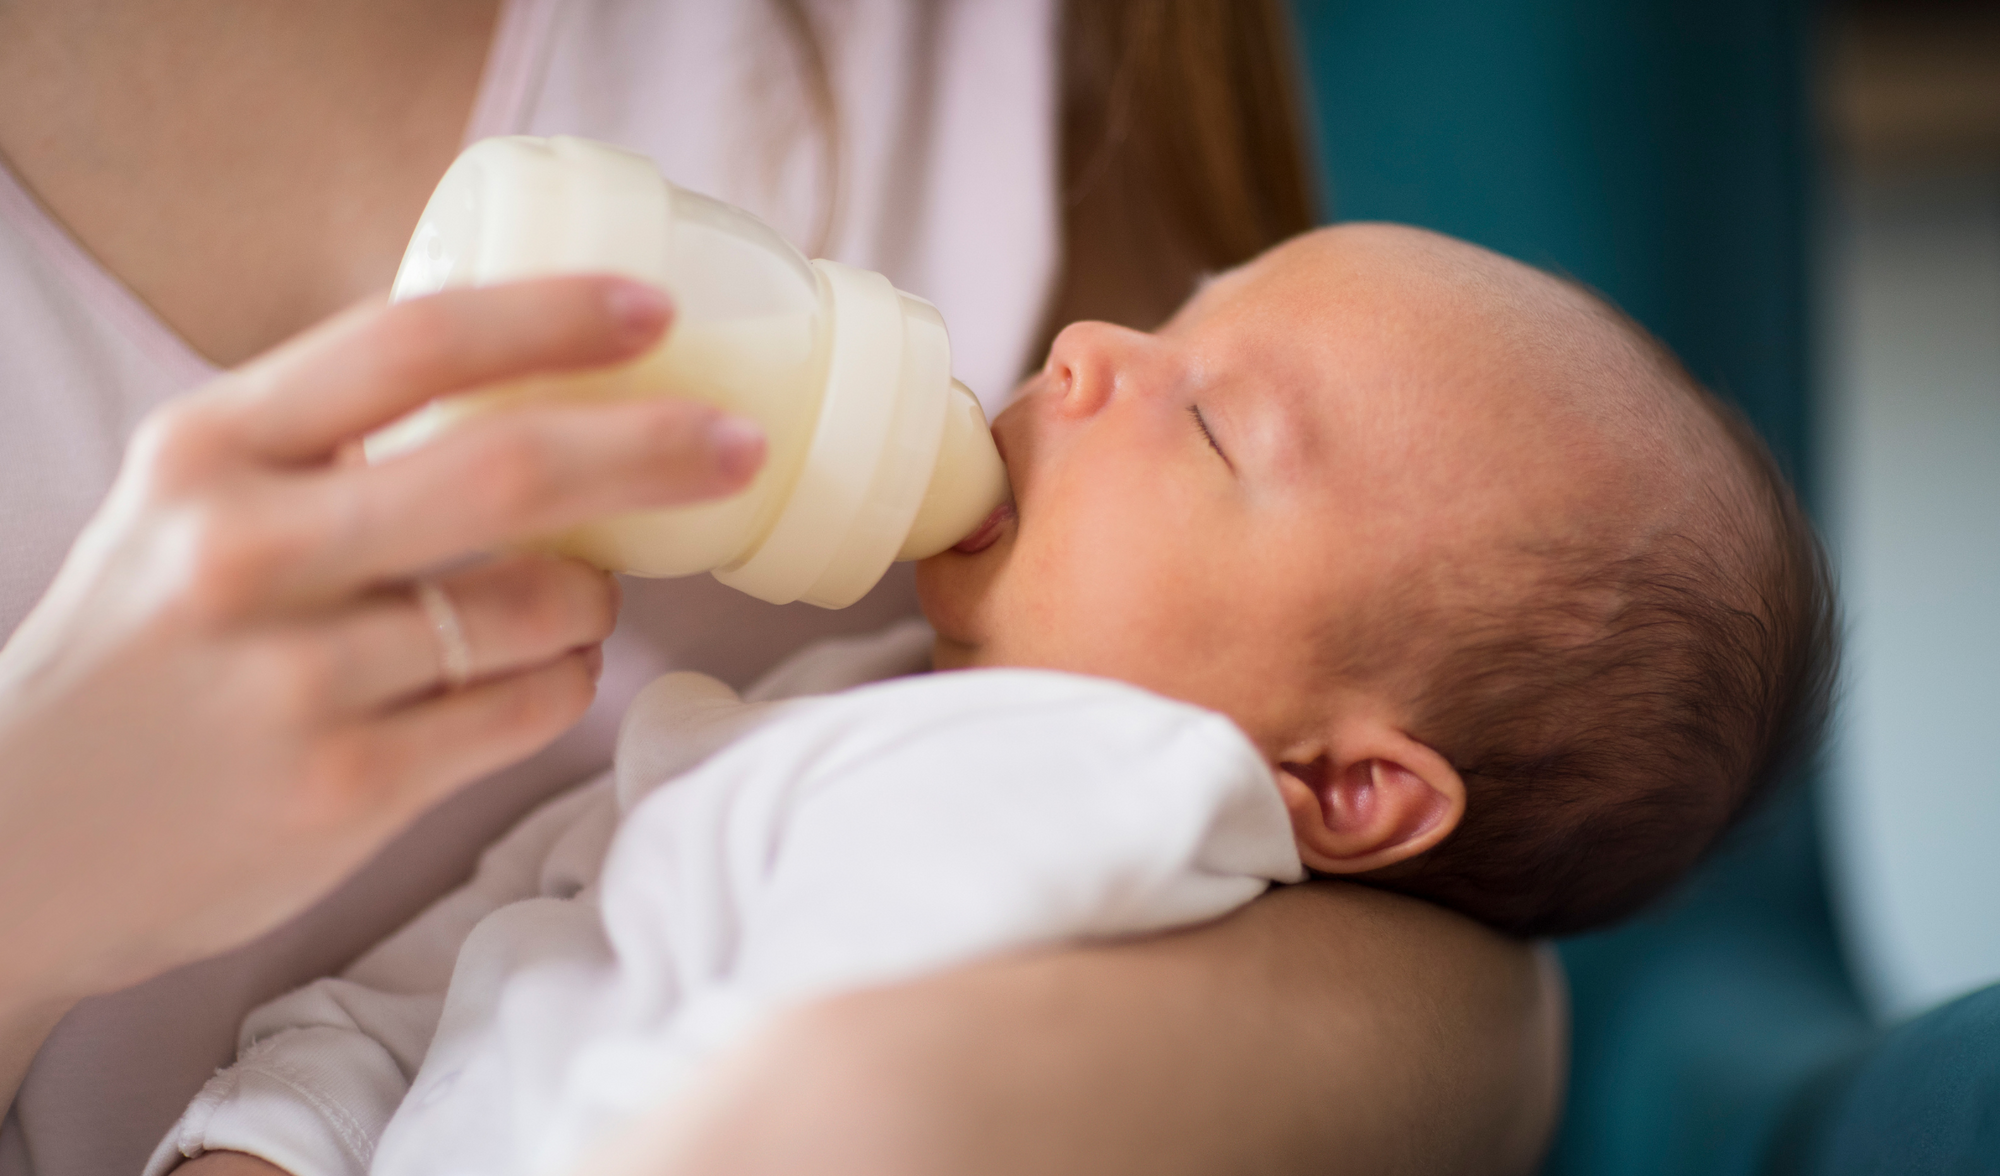 Does a Lip-Tie or Tongue-Tie Affect Bottle-Feeding?